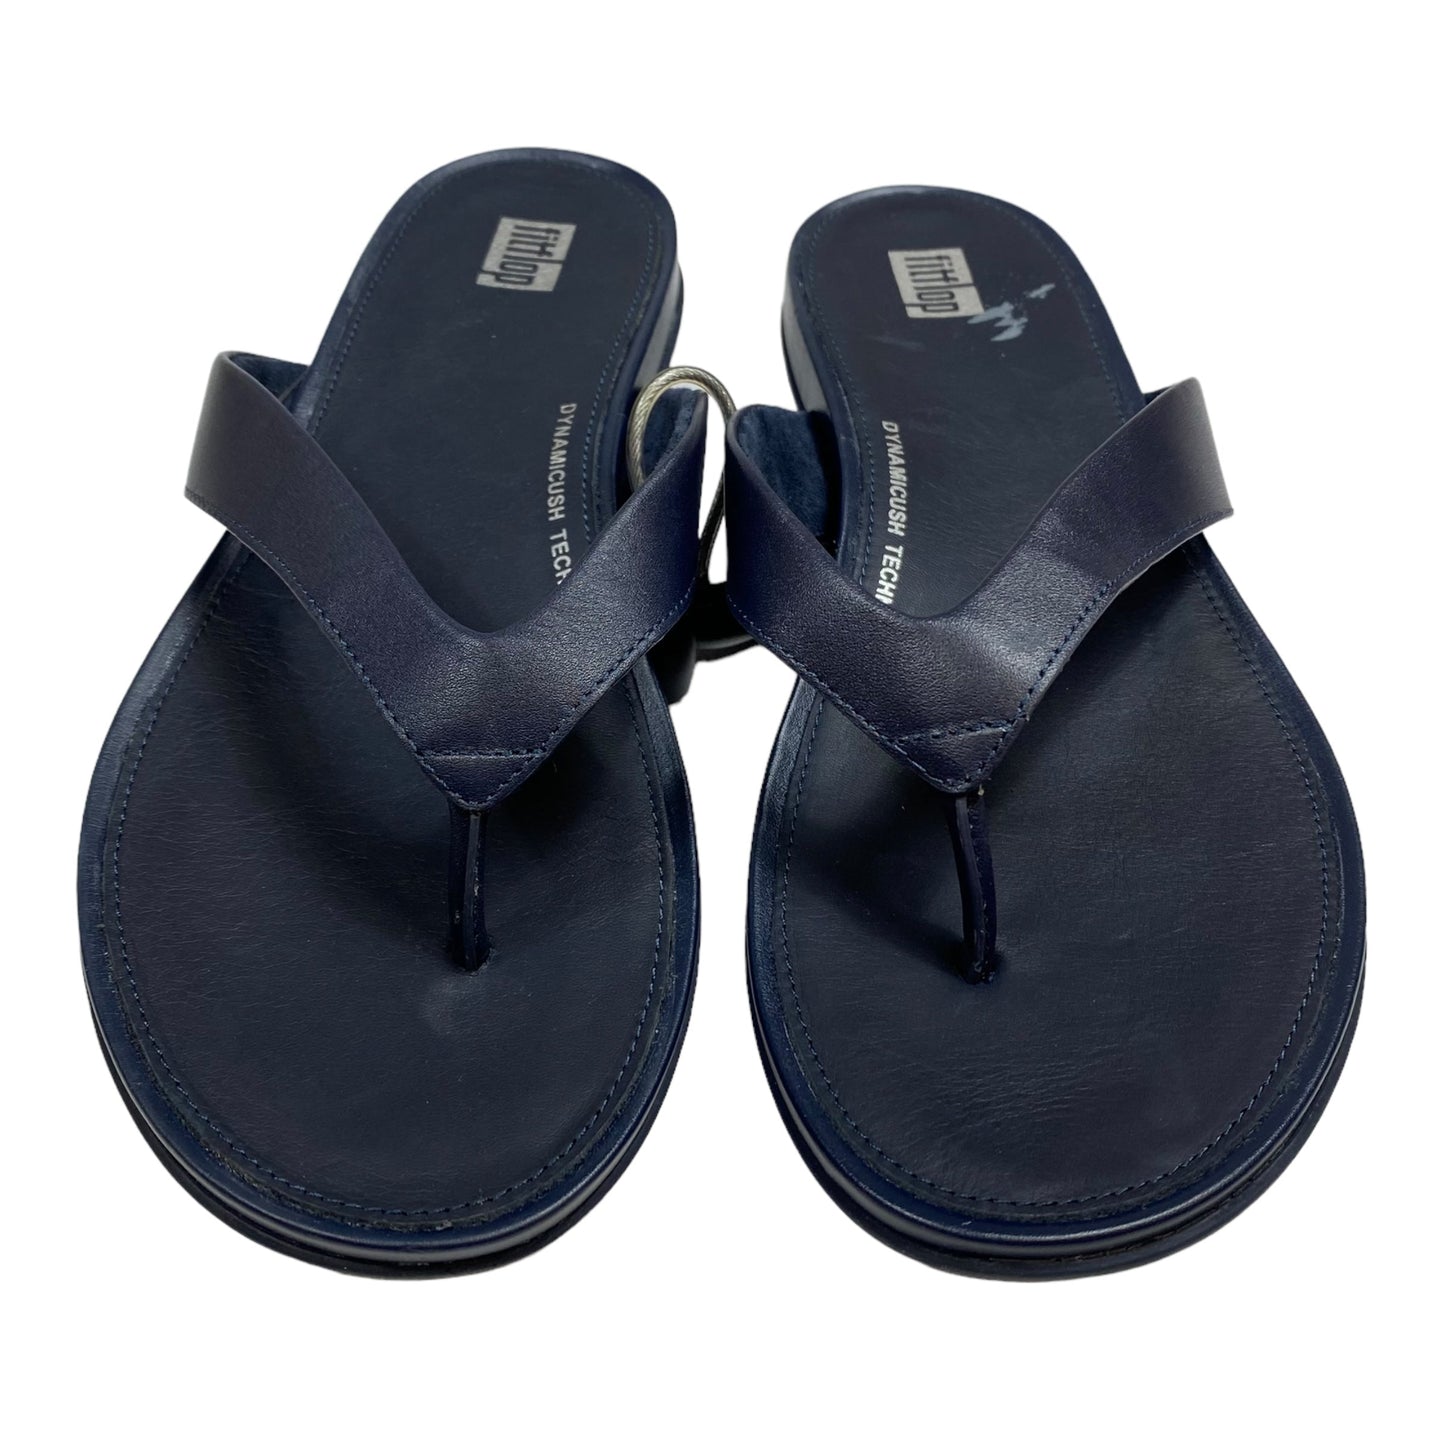 Sandals Flip Flops By Fitflop  Size: 7